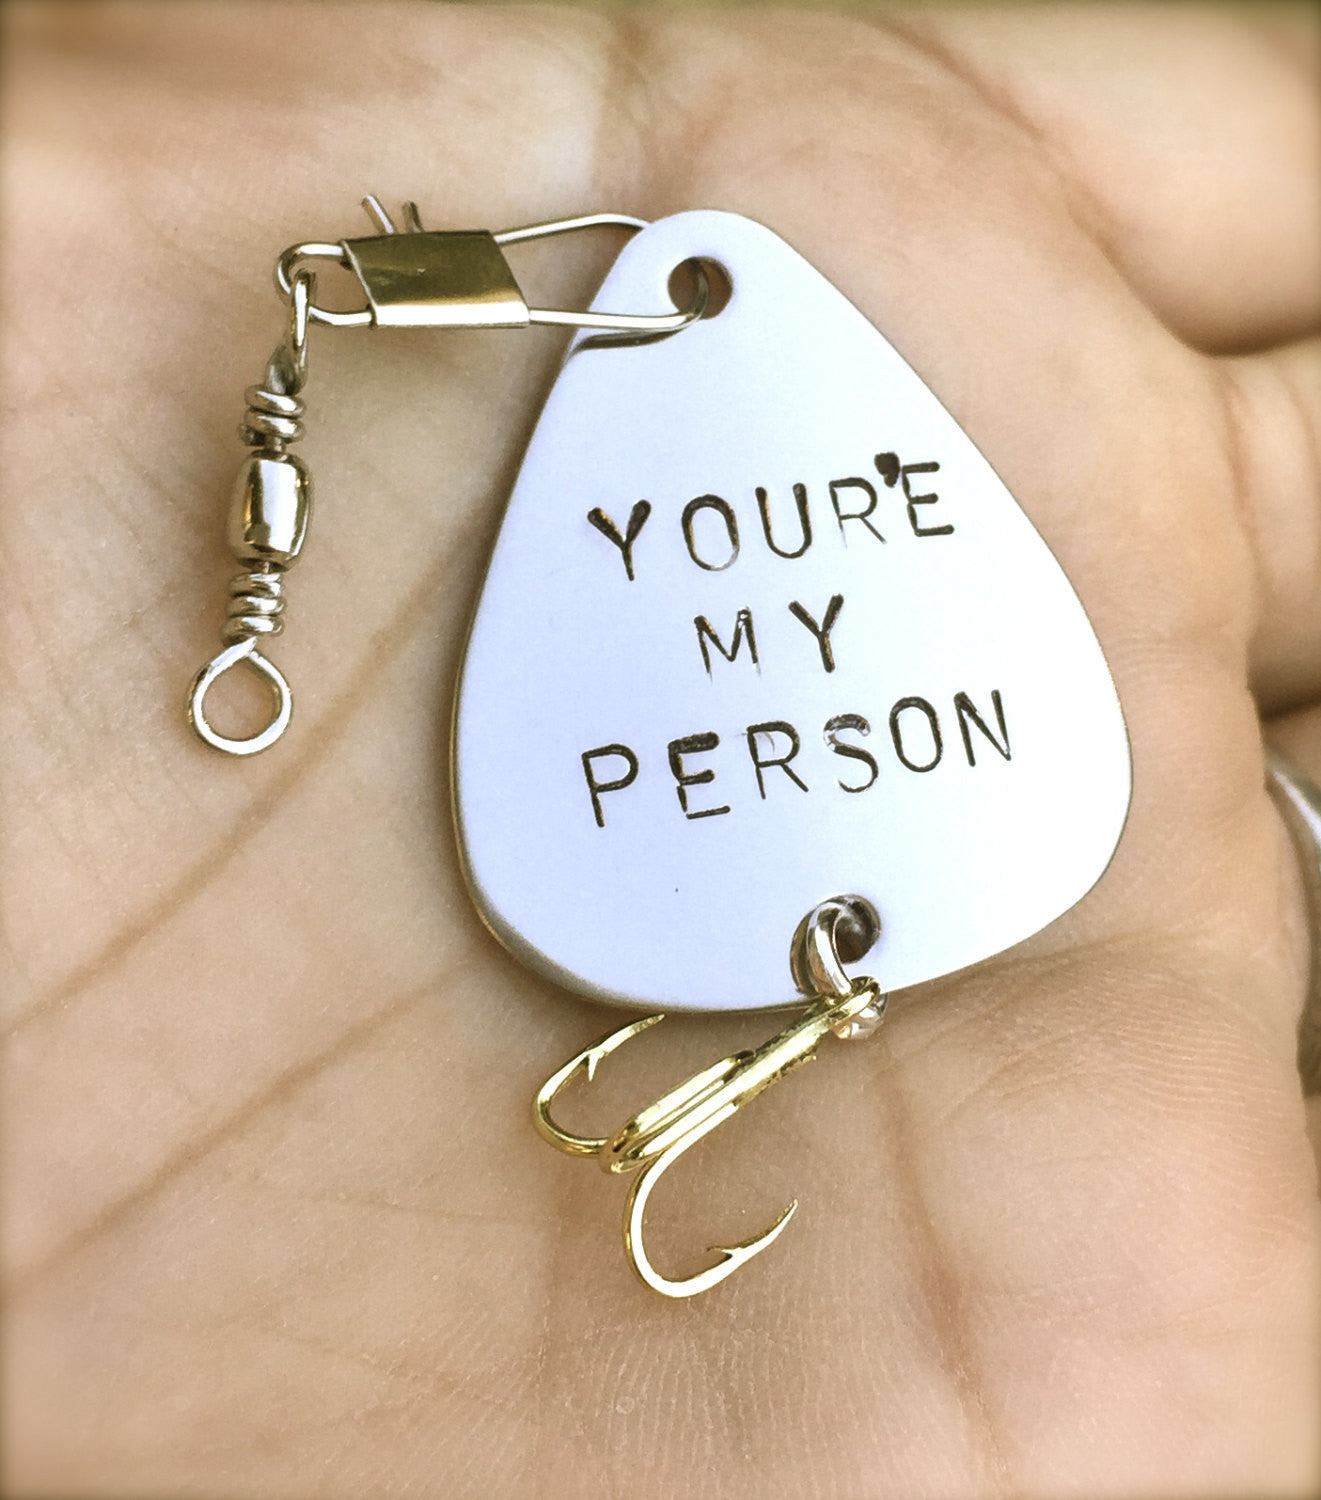 Fishing Lures, Your'e My Person, Father Of the Bride Fishing Lure, Forever Your Little Girl, My Reel True Love, Father's Day Gift, Gifts Men - Natashaaloha, jewelry, bracelets, necklace, keychains, fishing lures, gifts for men, charms, personalized, 